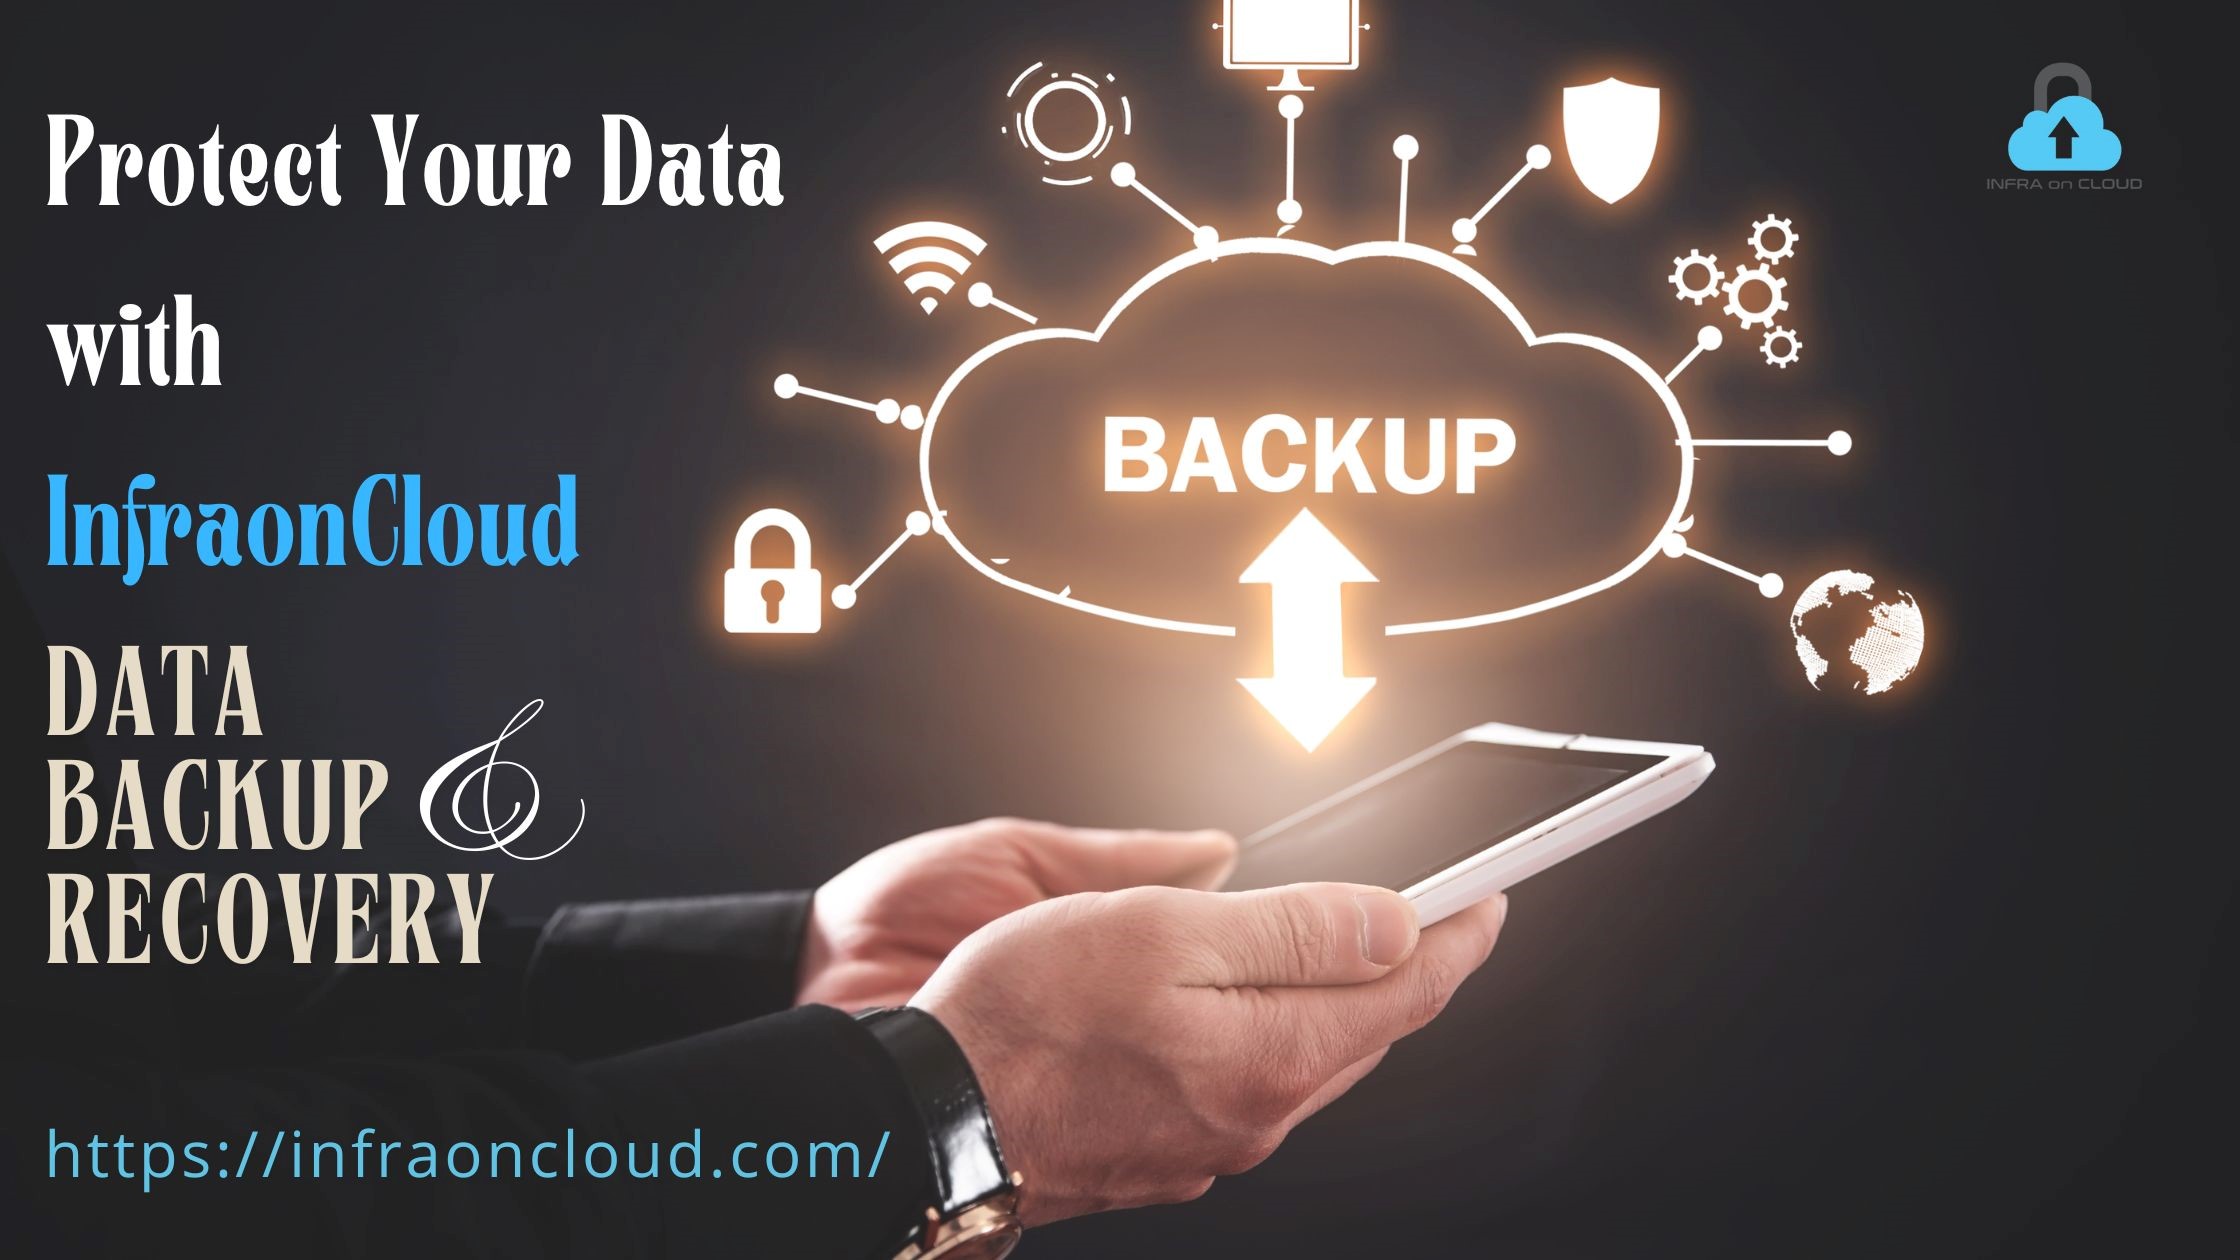 InfraonCloud Backup and Recovery Solutions